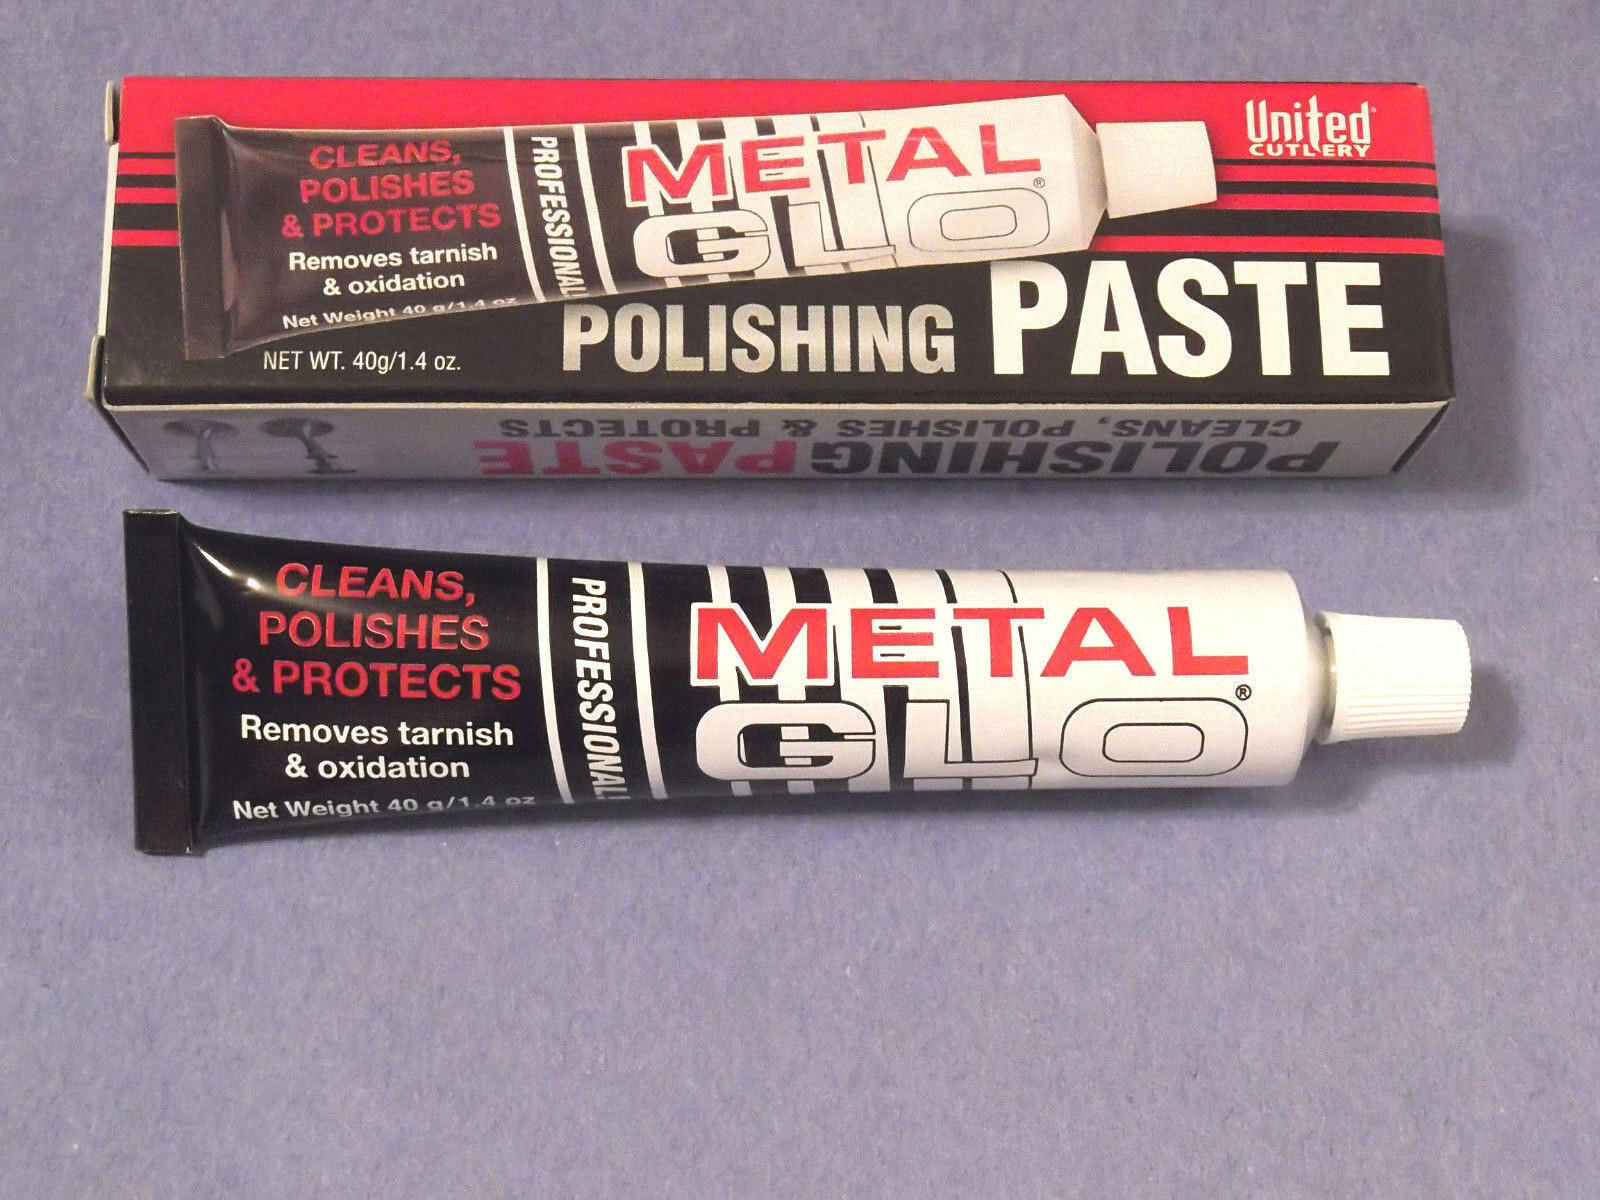 United Cutlery Uc2723 Metal Glo Polishing Paste For Knives, Jewelry And More!